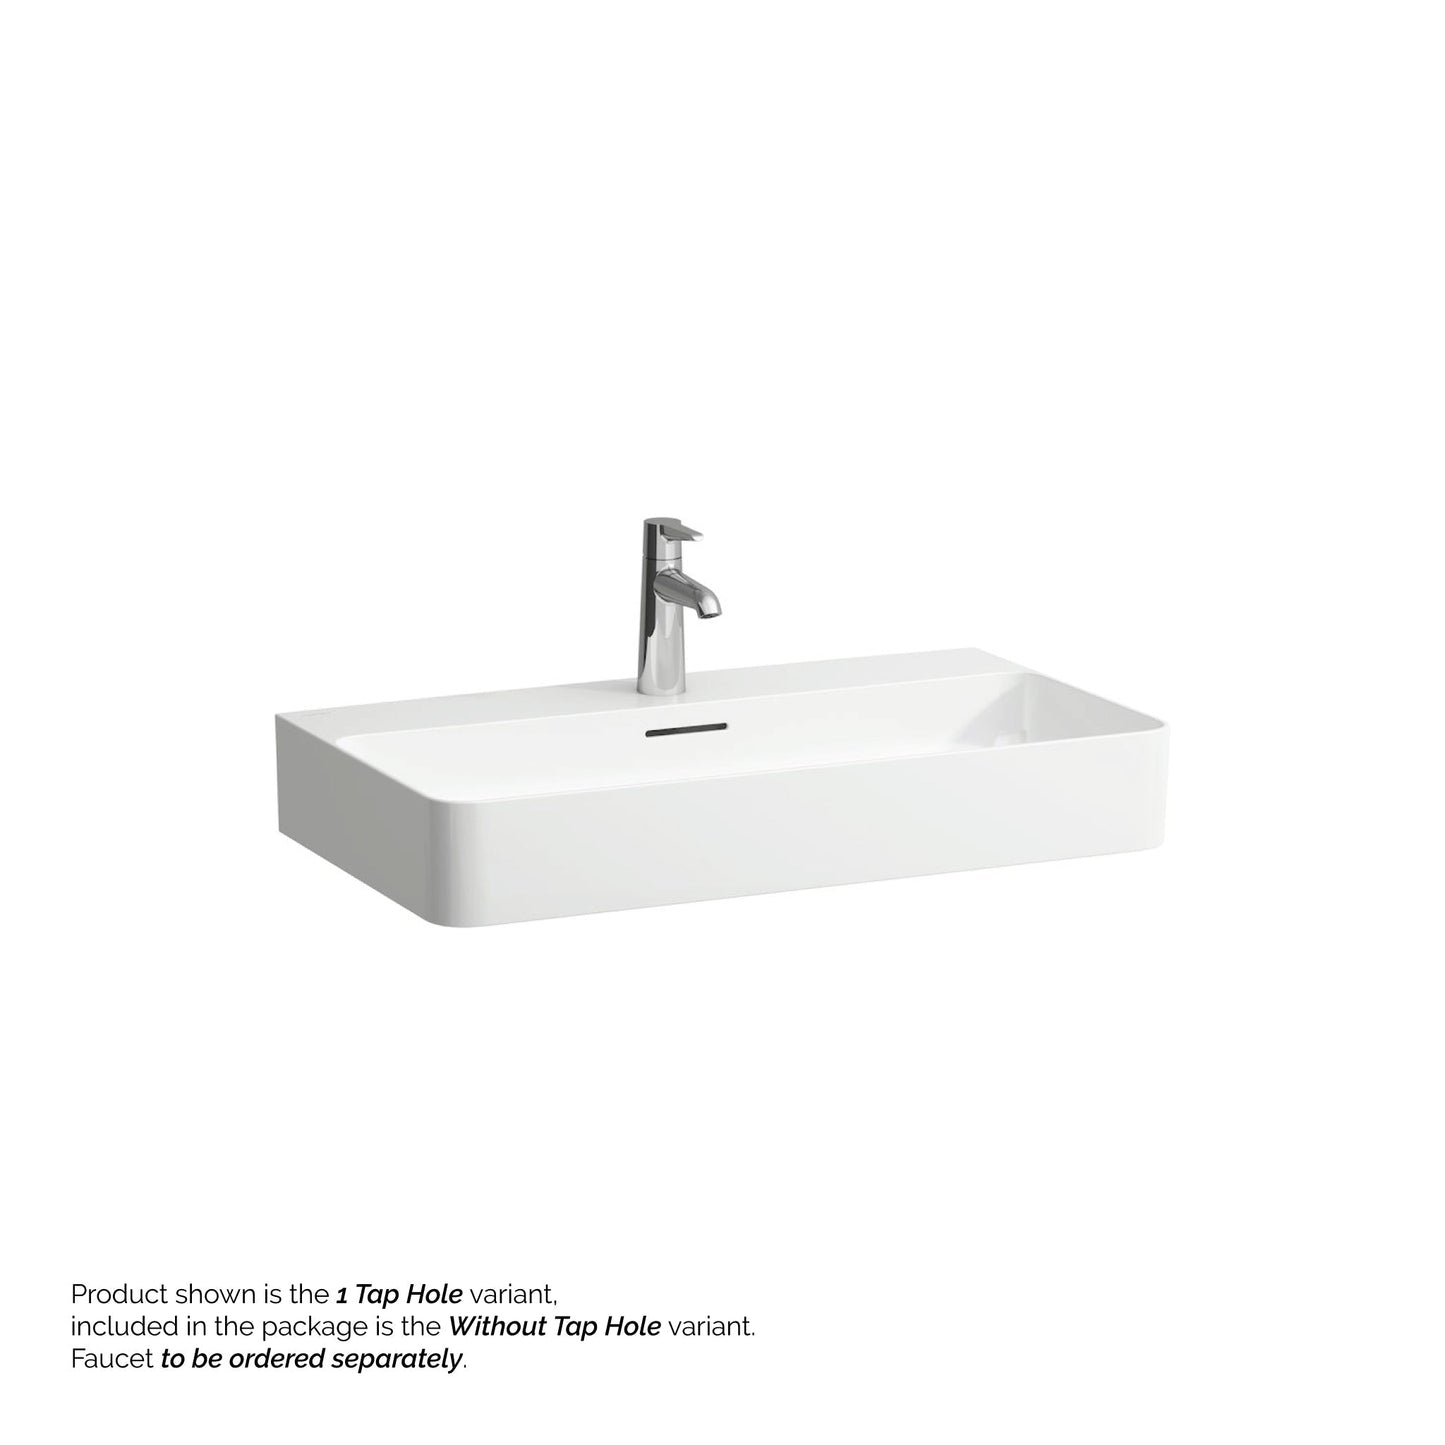 Laufen Val 30" x 17" Matte White Ceramic Wall-Mounted Bathroom Sink Without Faucet Hole